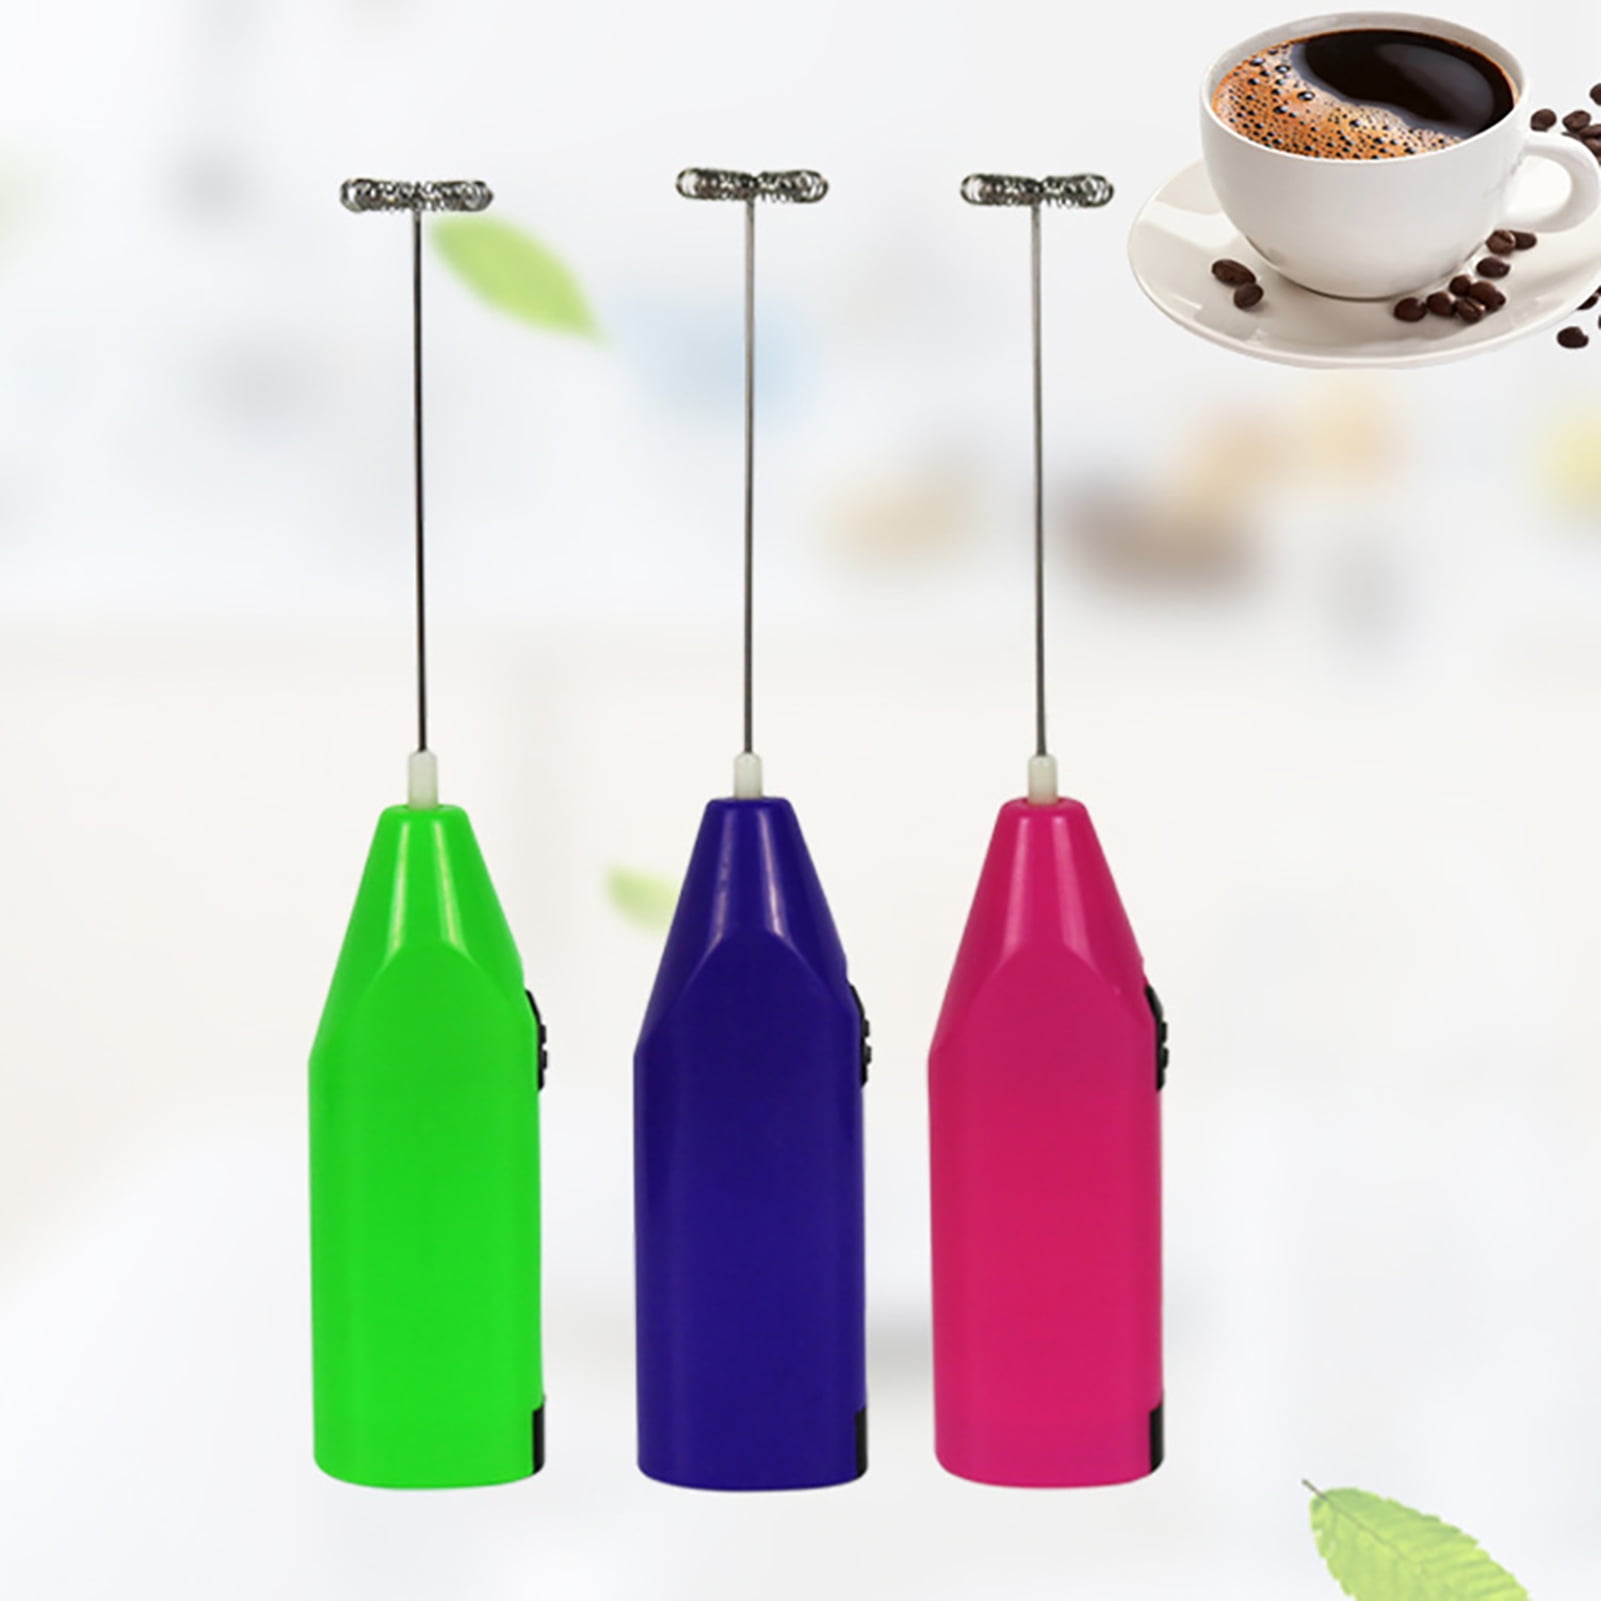 Electric Milk Easy Frother,Whisk Drink Mixer for Coffee Mini Foamer Coffee Foam Maker Mixer, Blue